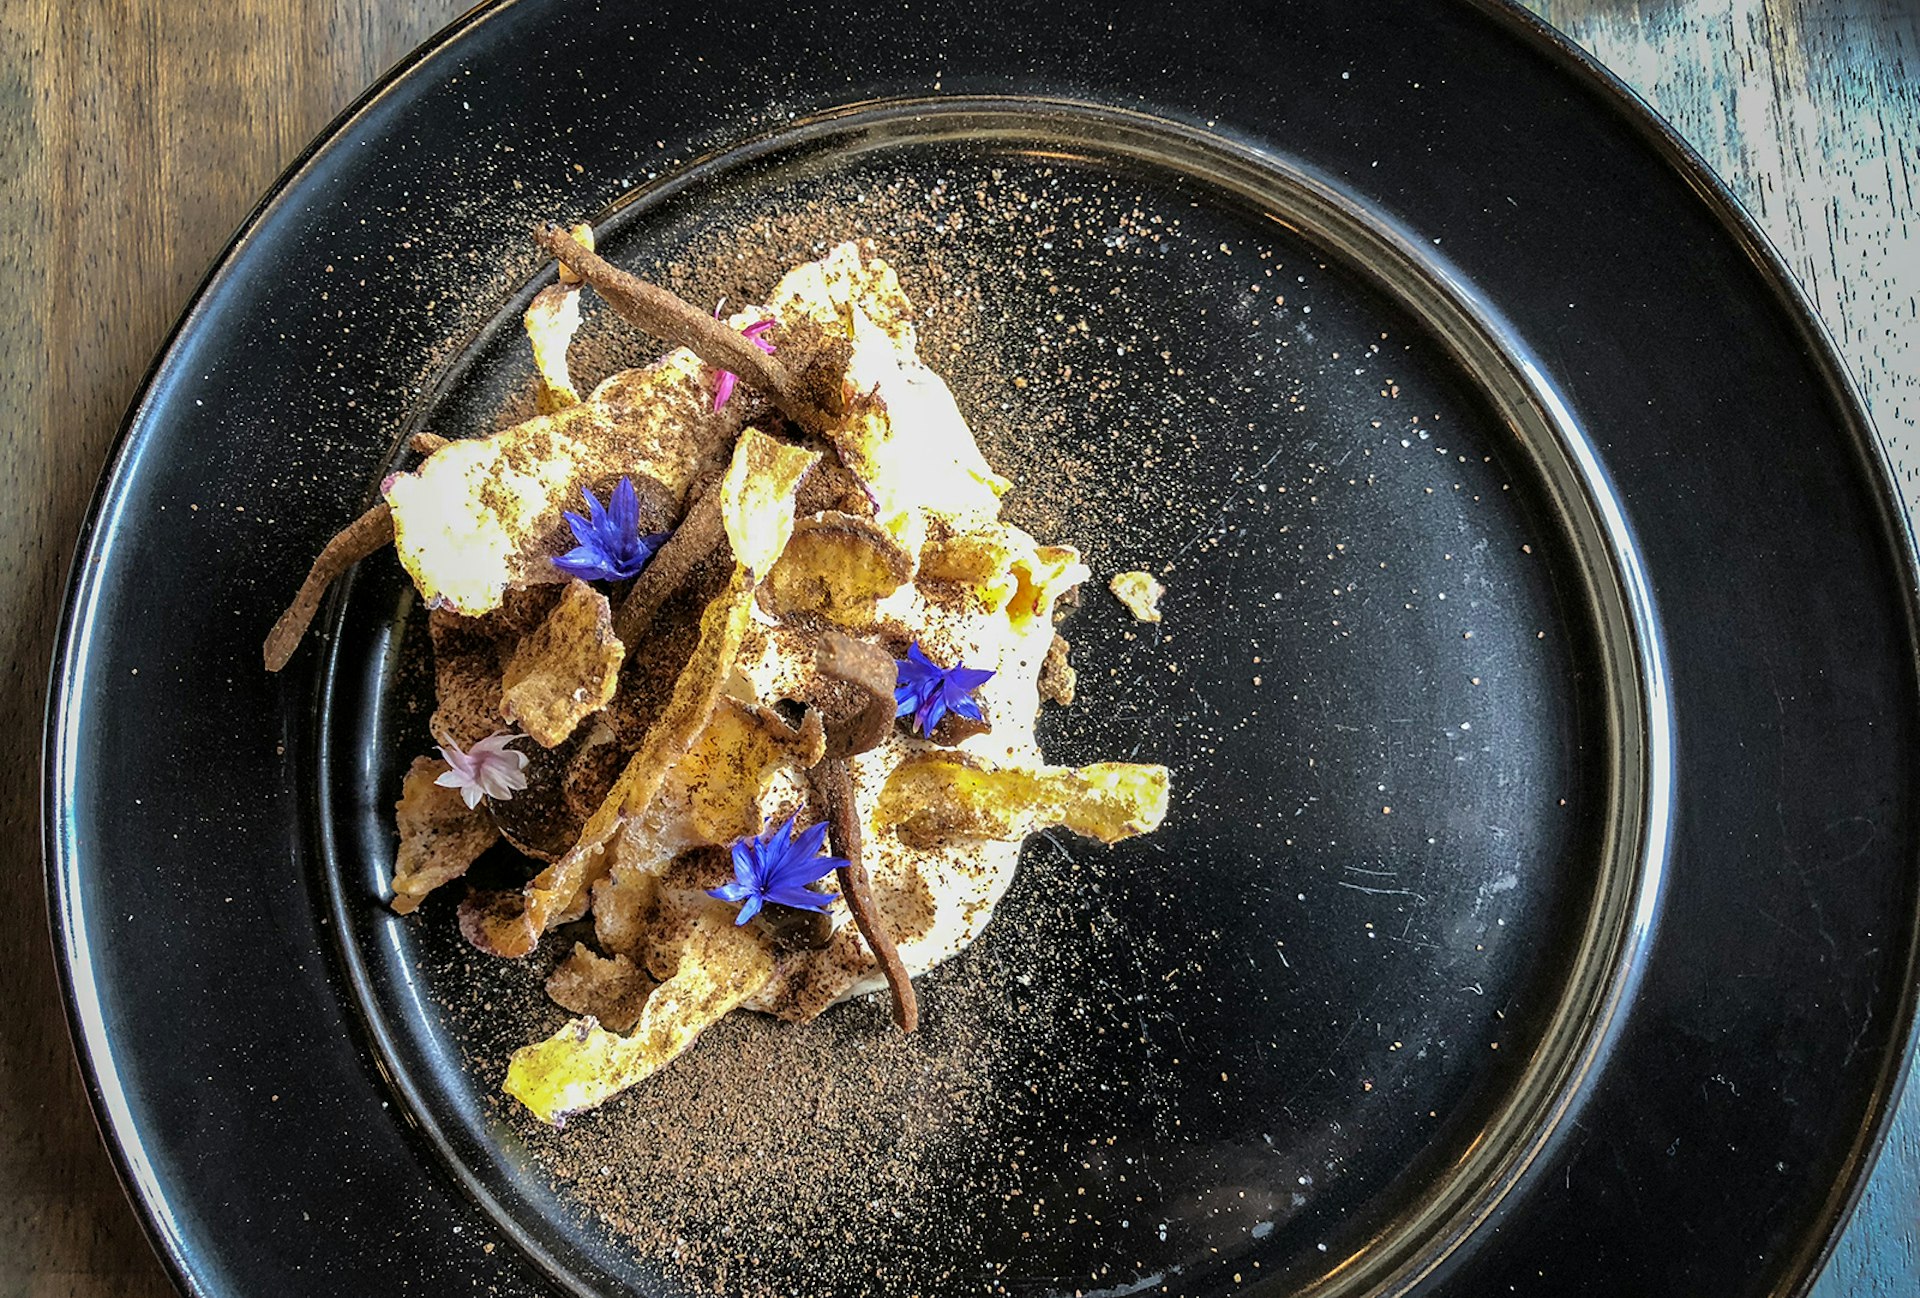 A close-up of modern Bolivian food on a black plate, sprinkled with brown powder and garnished with small purple and pink flowers. La Paz, Bolivia.